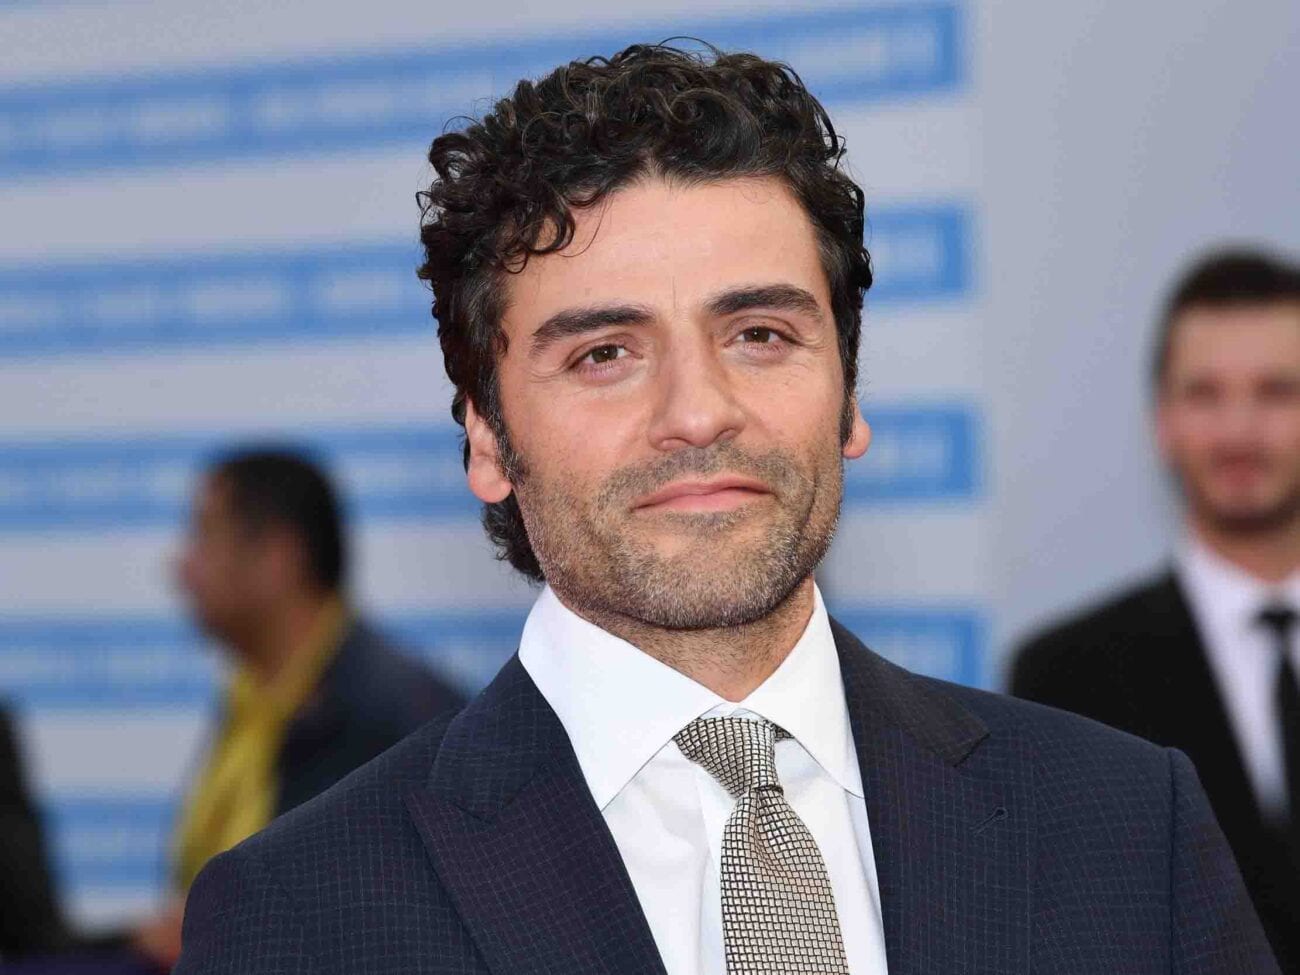 Oscar Isaac made it big in the new 'Star Wars' trilogy, but what's next for him? Here's what we know about his role in 'Moon Knight'.